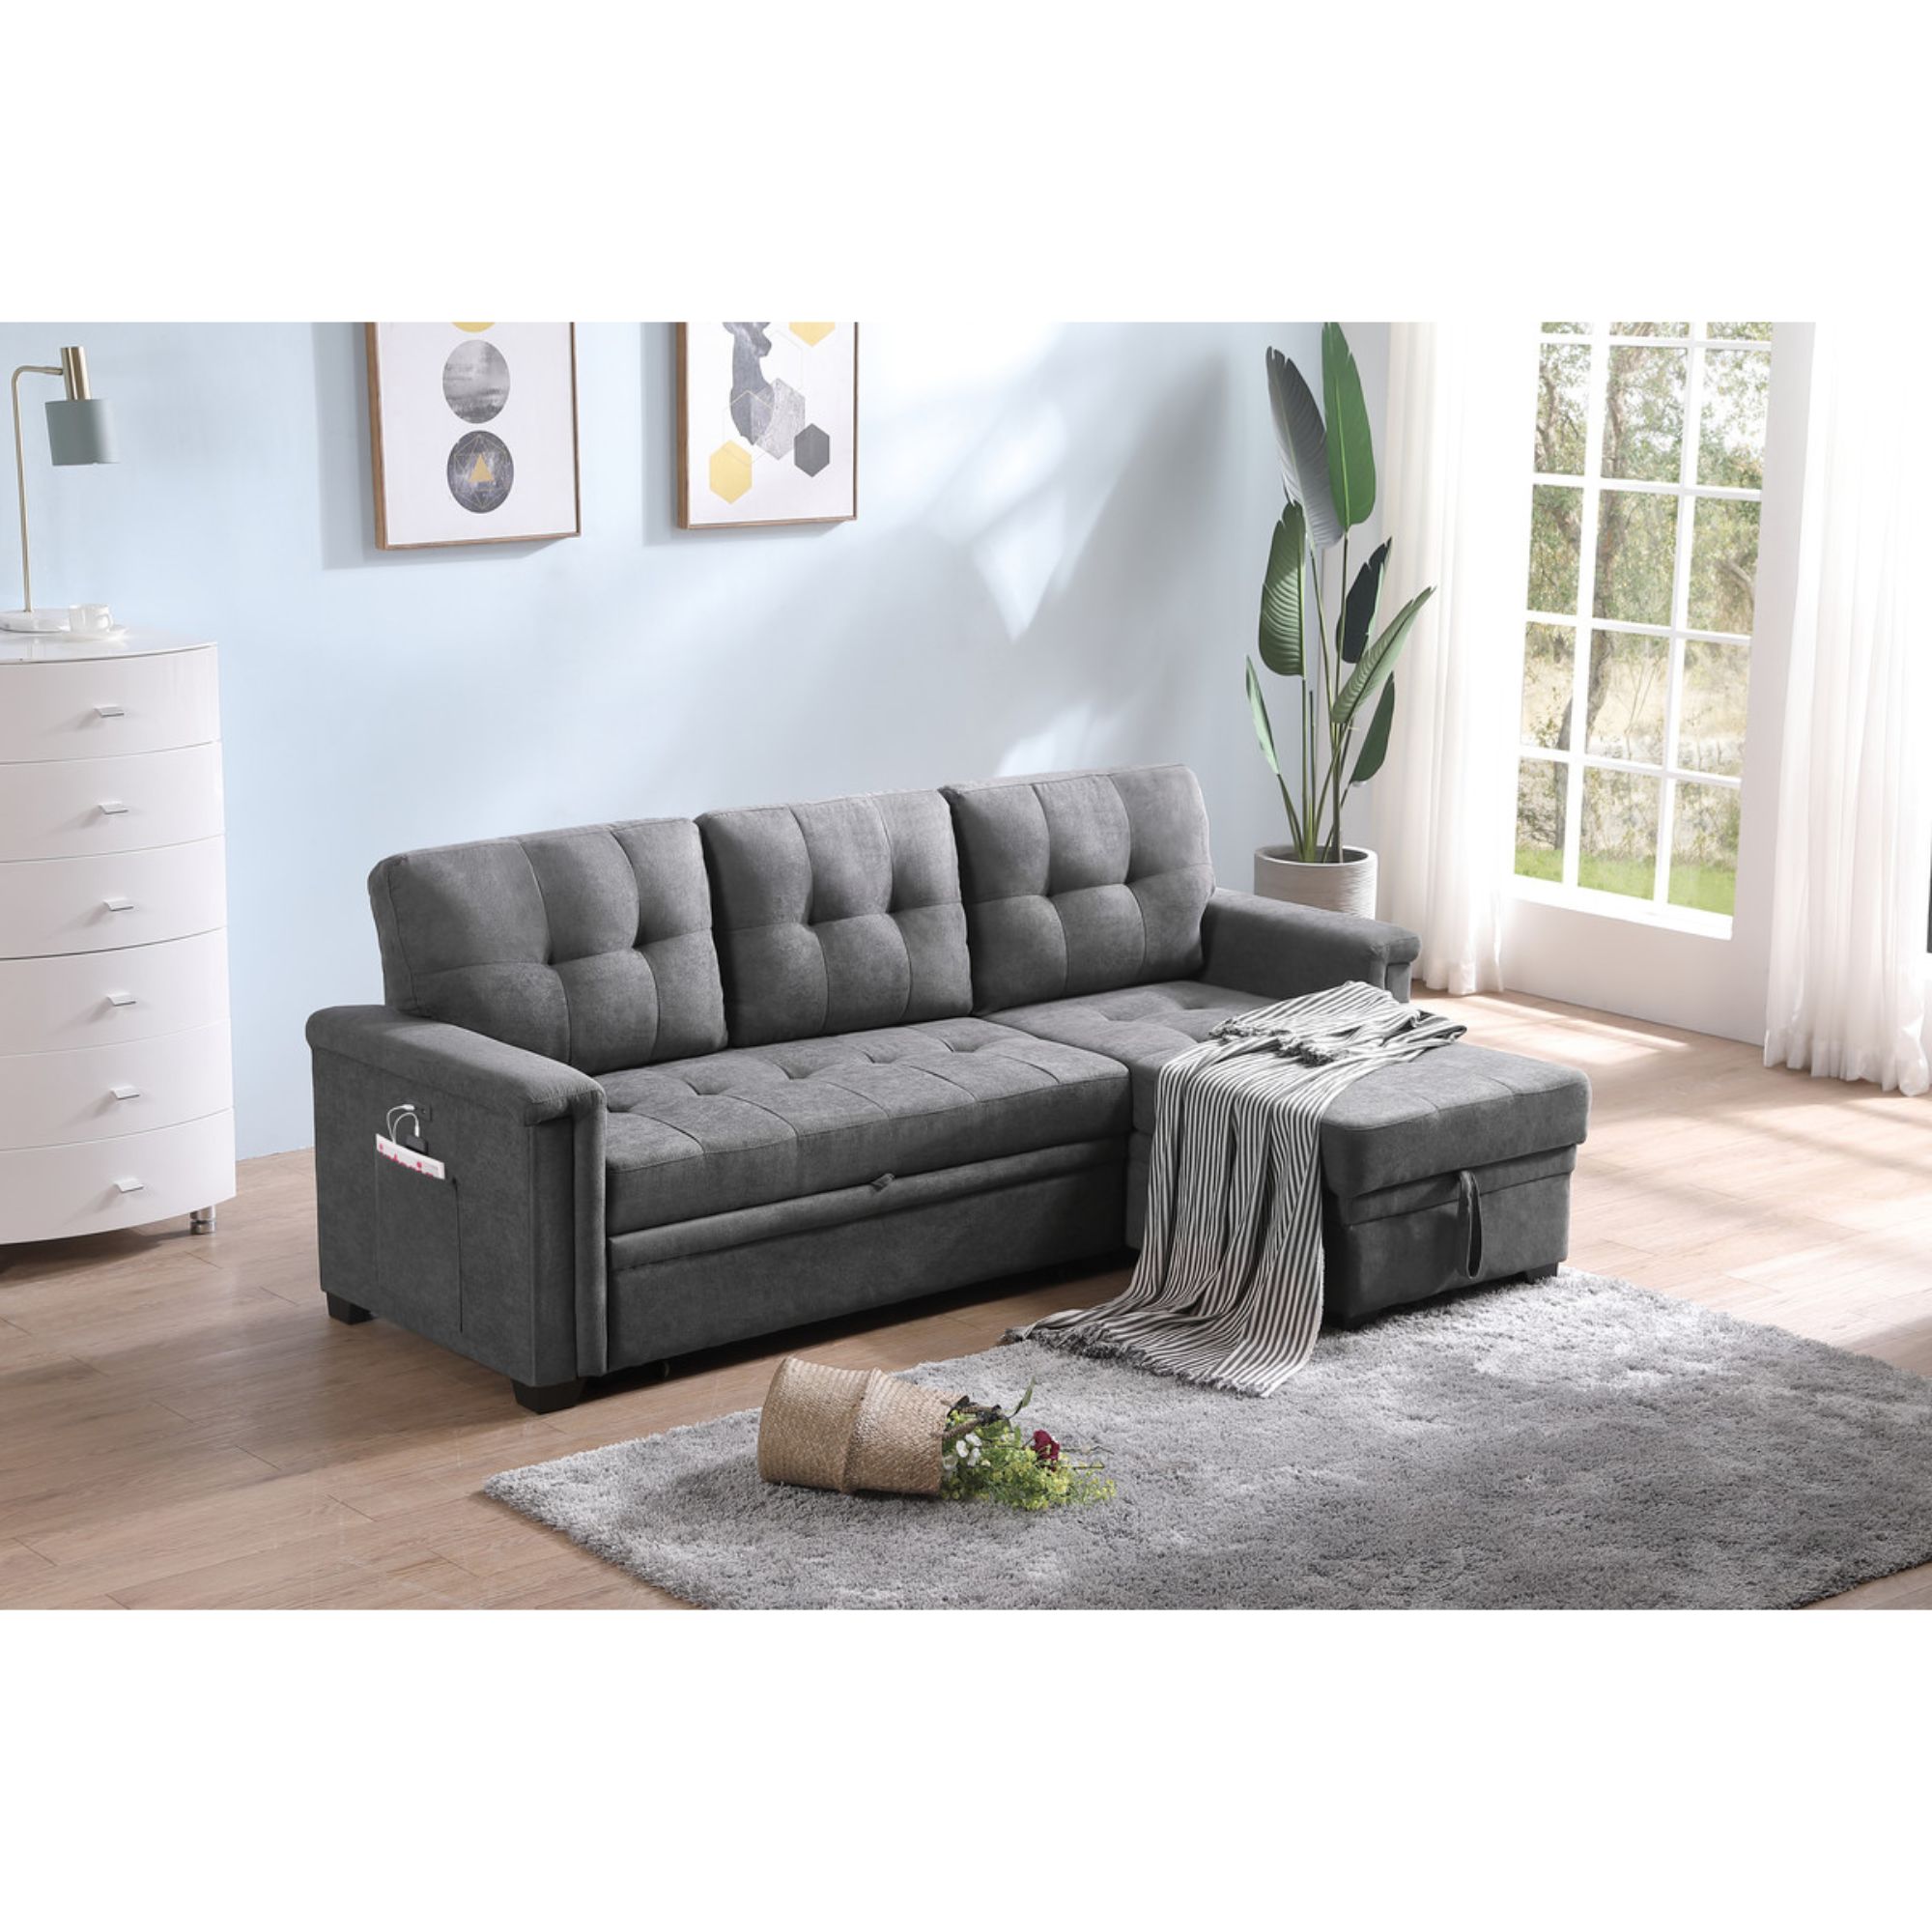 Contemporary Home Living Furniture, Kaden Fabric Sleeper Sectional Sofa With Storage Chaise And Arms